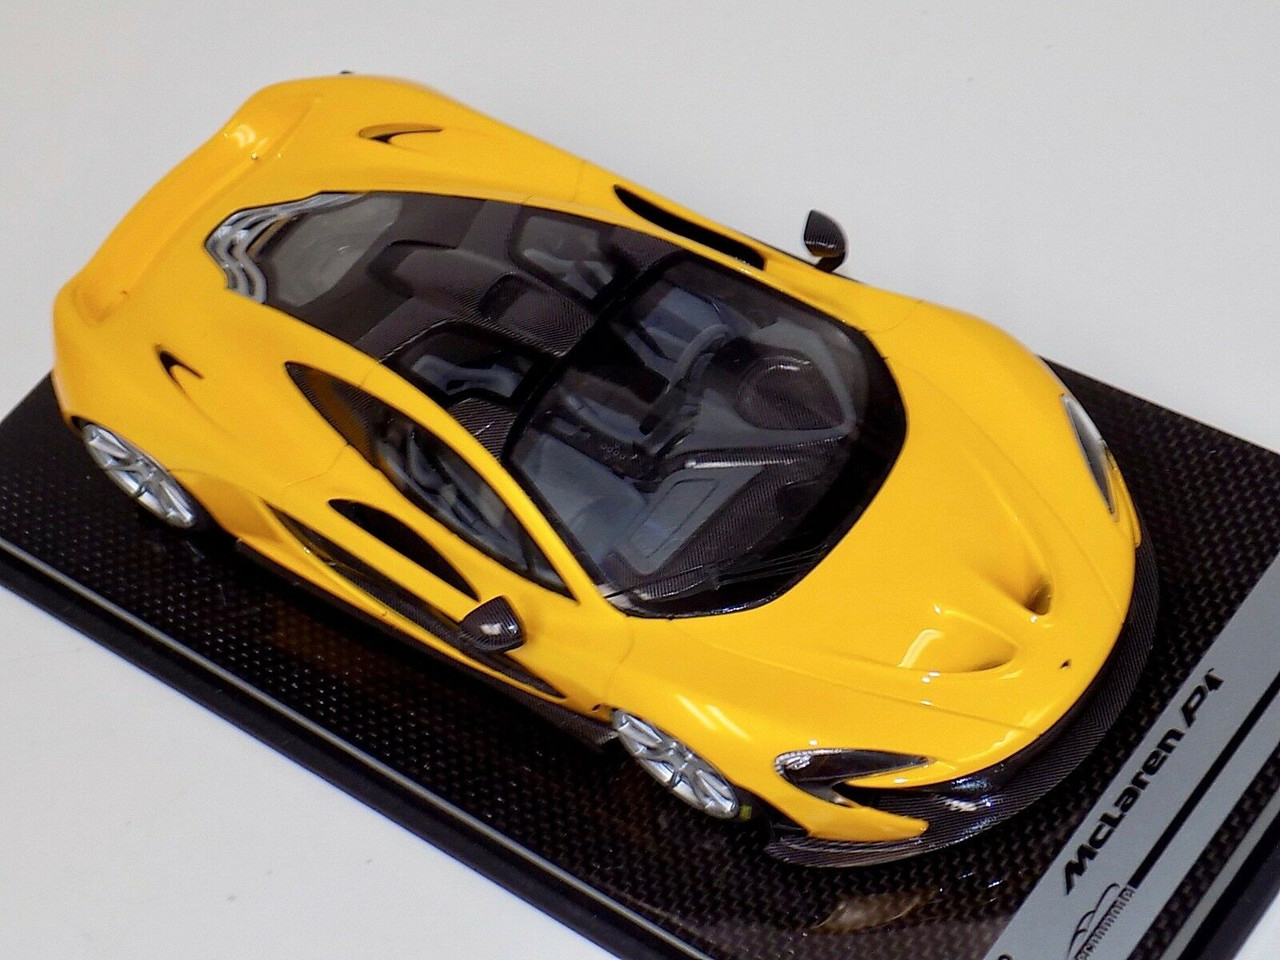 1/18 Tecnomodel McLaren P1 (Gloss Yellow with Silver wheels) with Carbon Base Resin Car Model Limited 01/01